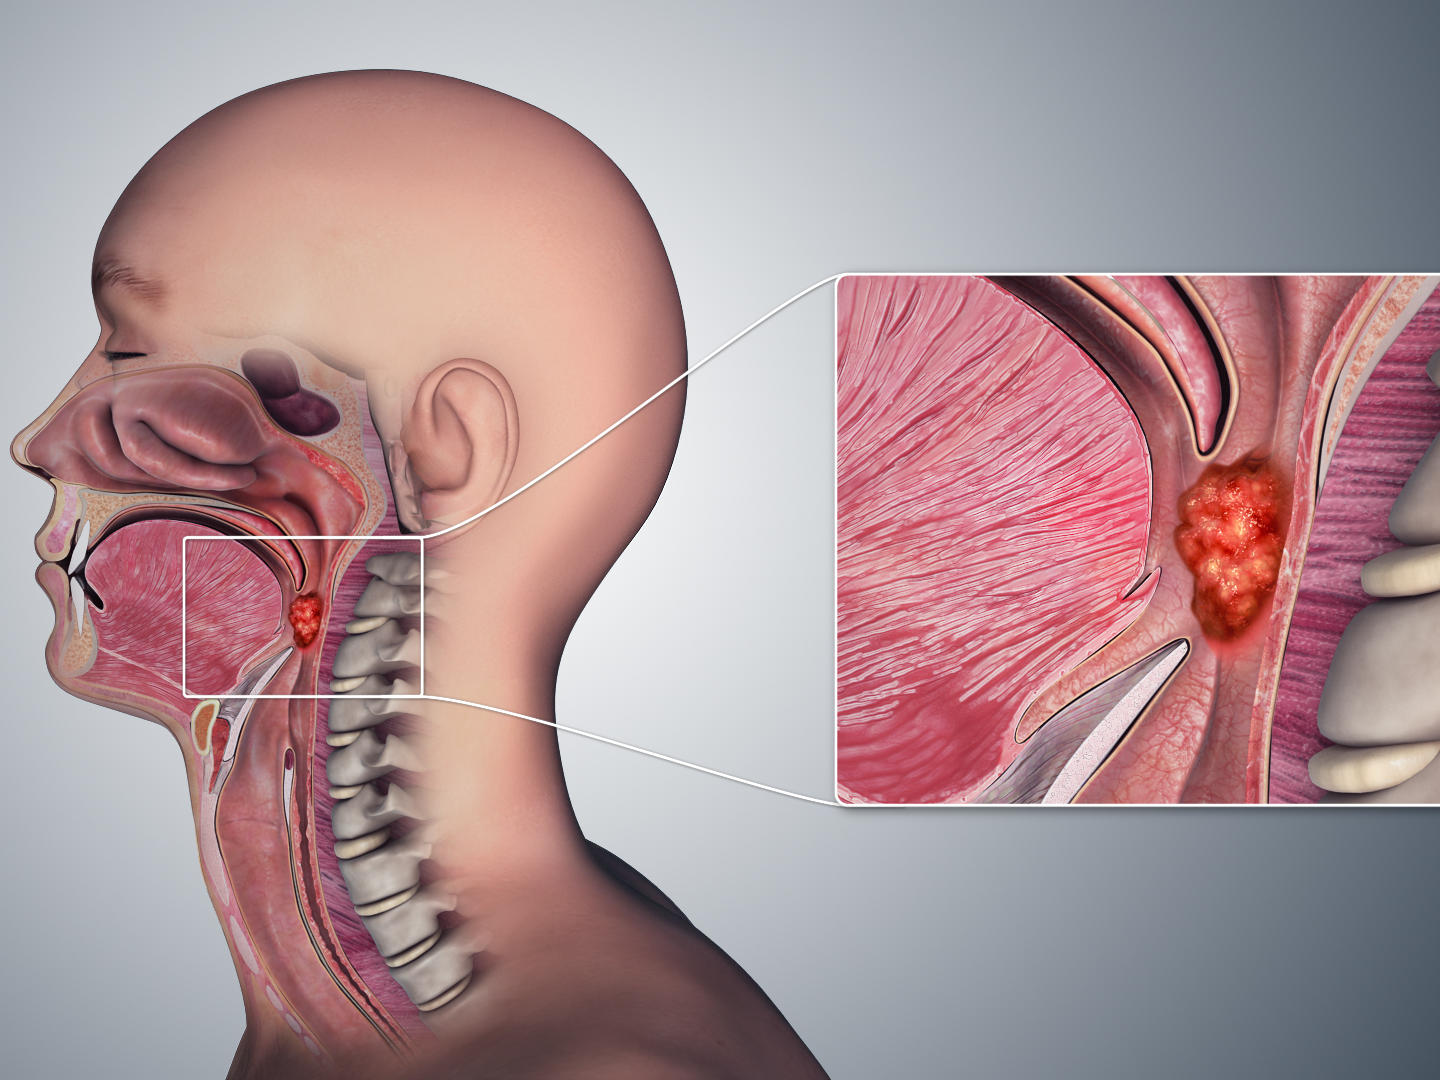 hpv throat cancer treatment side effects)